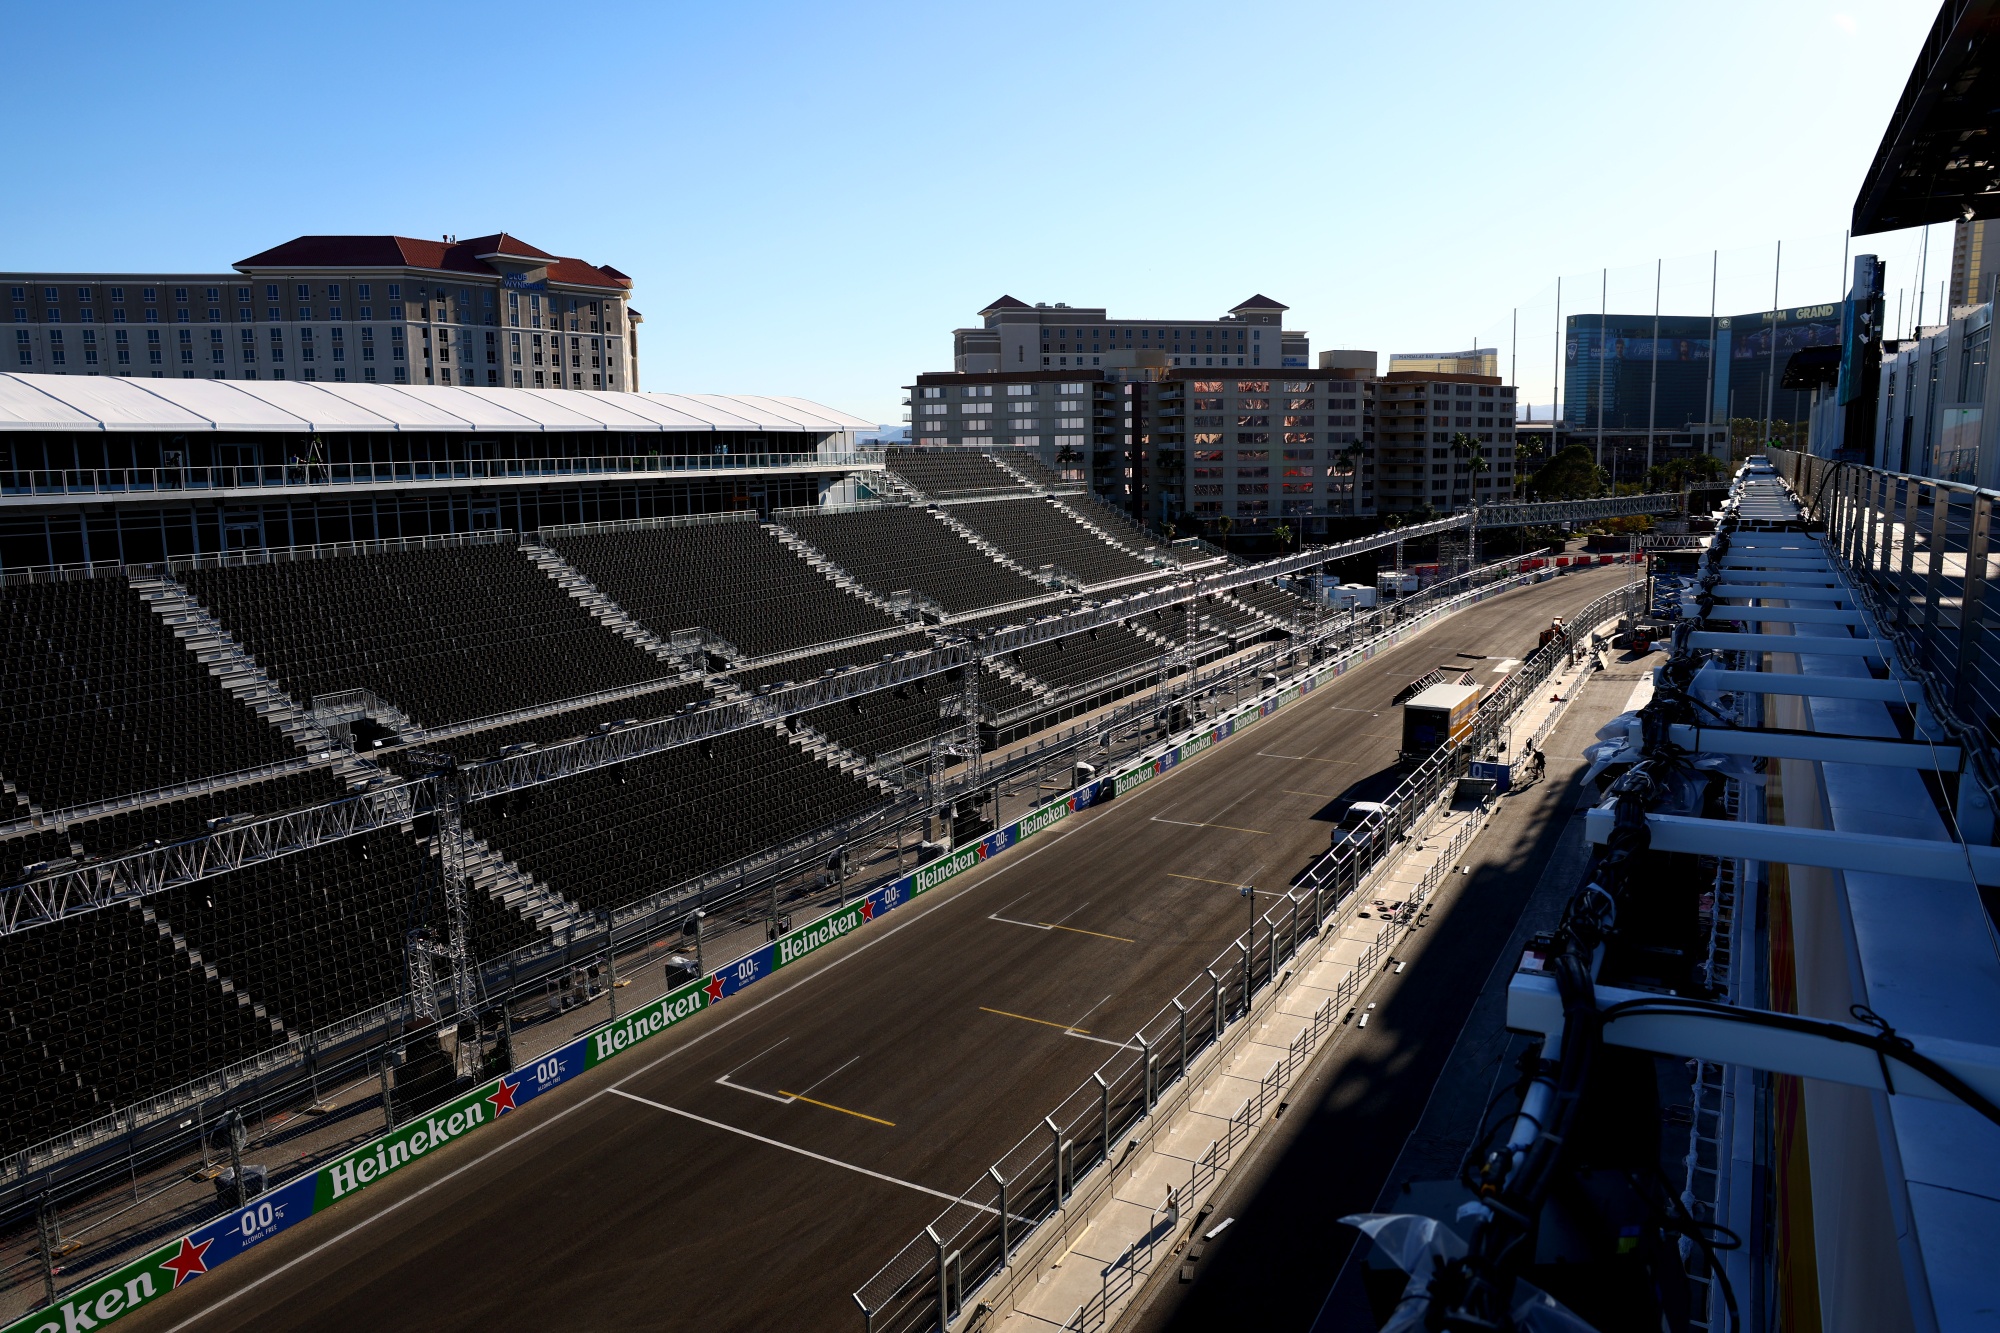 Las Vegas Grand Prix F1 Ticket Prices Dropping but Still a Top Seller